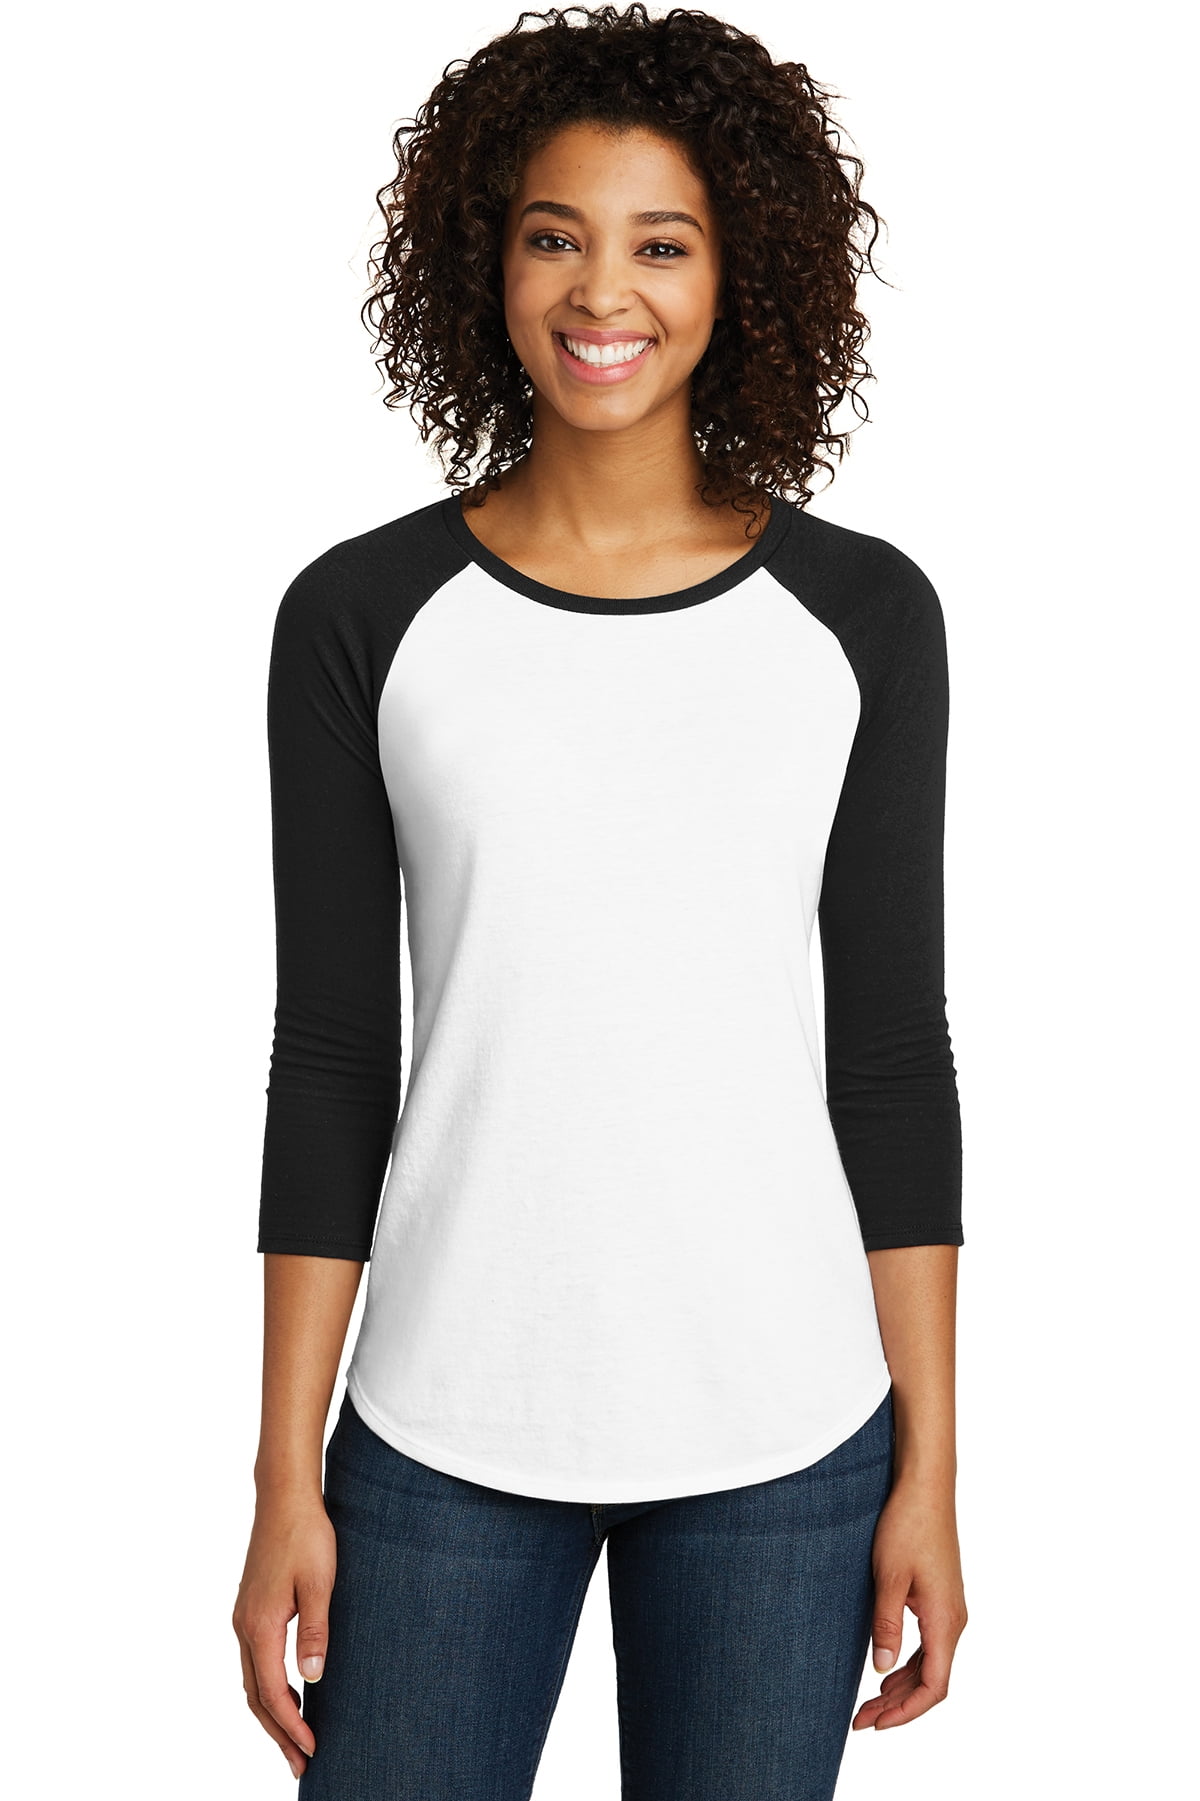 JustBlanks Women's Fitted Very Important Tee 3/4-Sleeve Raglan 4.3-ounce,  100% Cotton Body Form Fitting Crew Neck T-Shirt for Women - Black/ White -  XX-Large